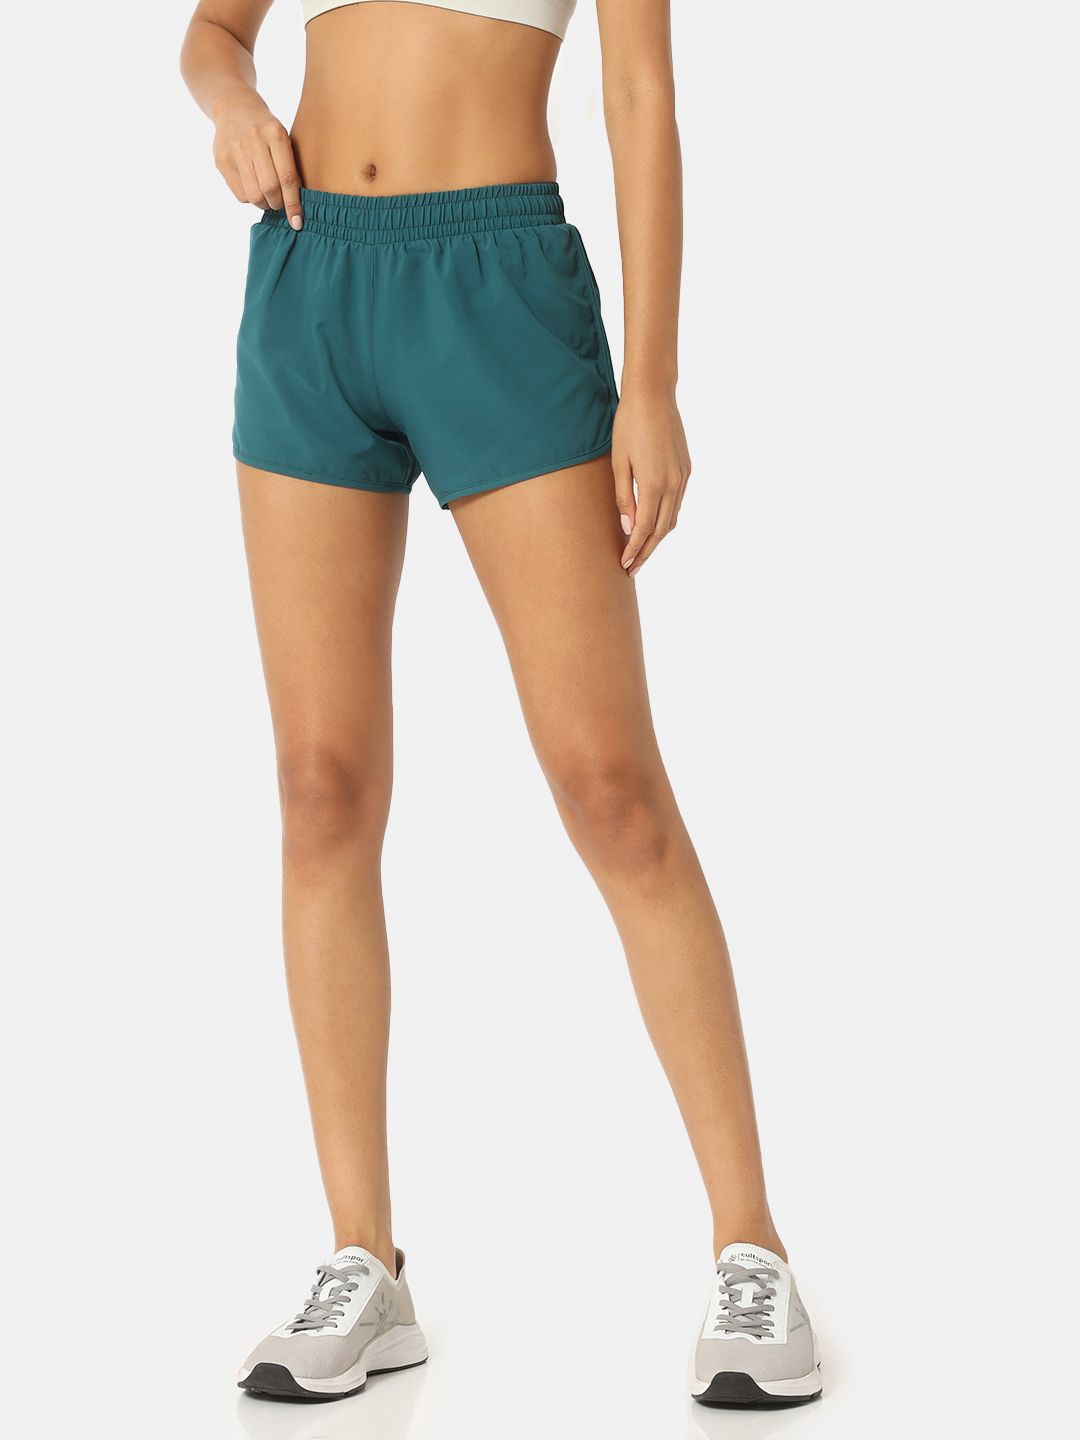 Cultsport Women Teal Green Solid Slim Fit Sports Shorts Price in India